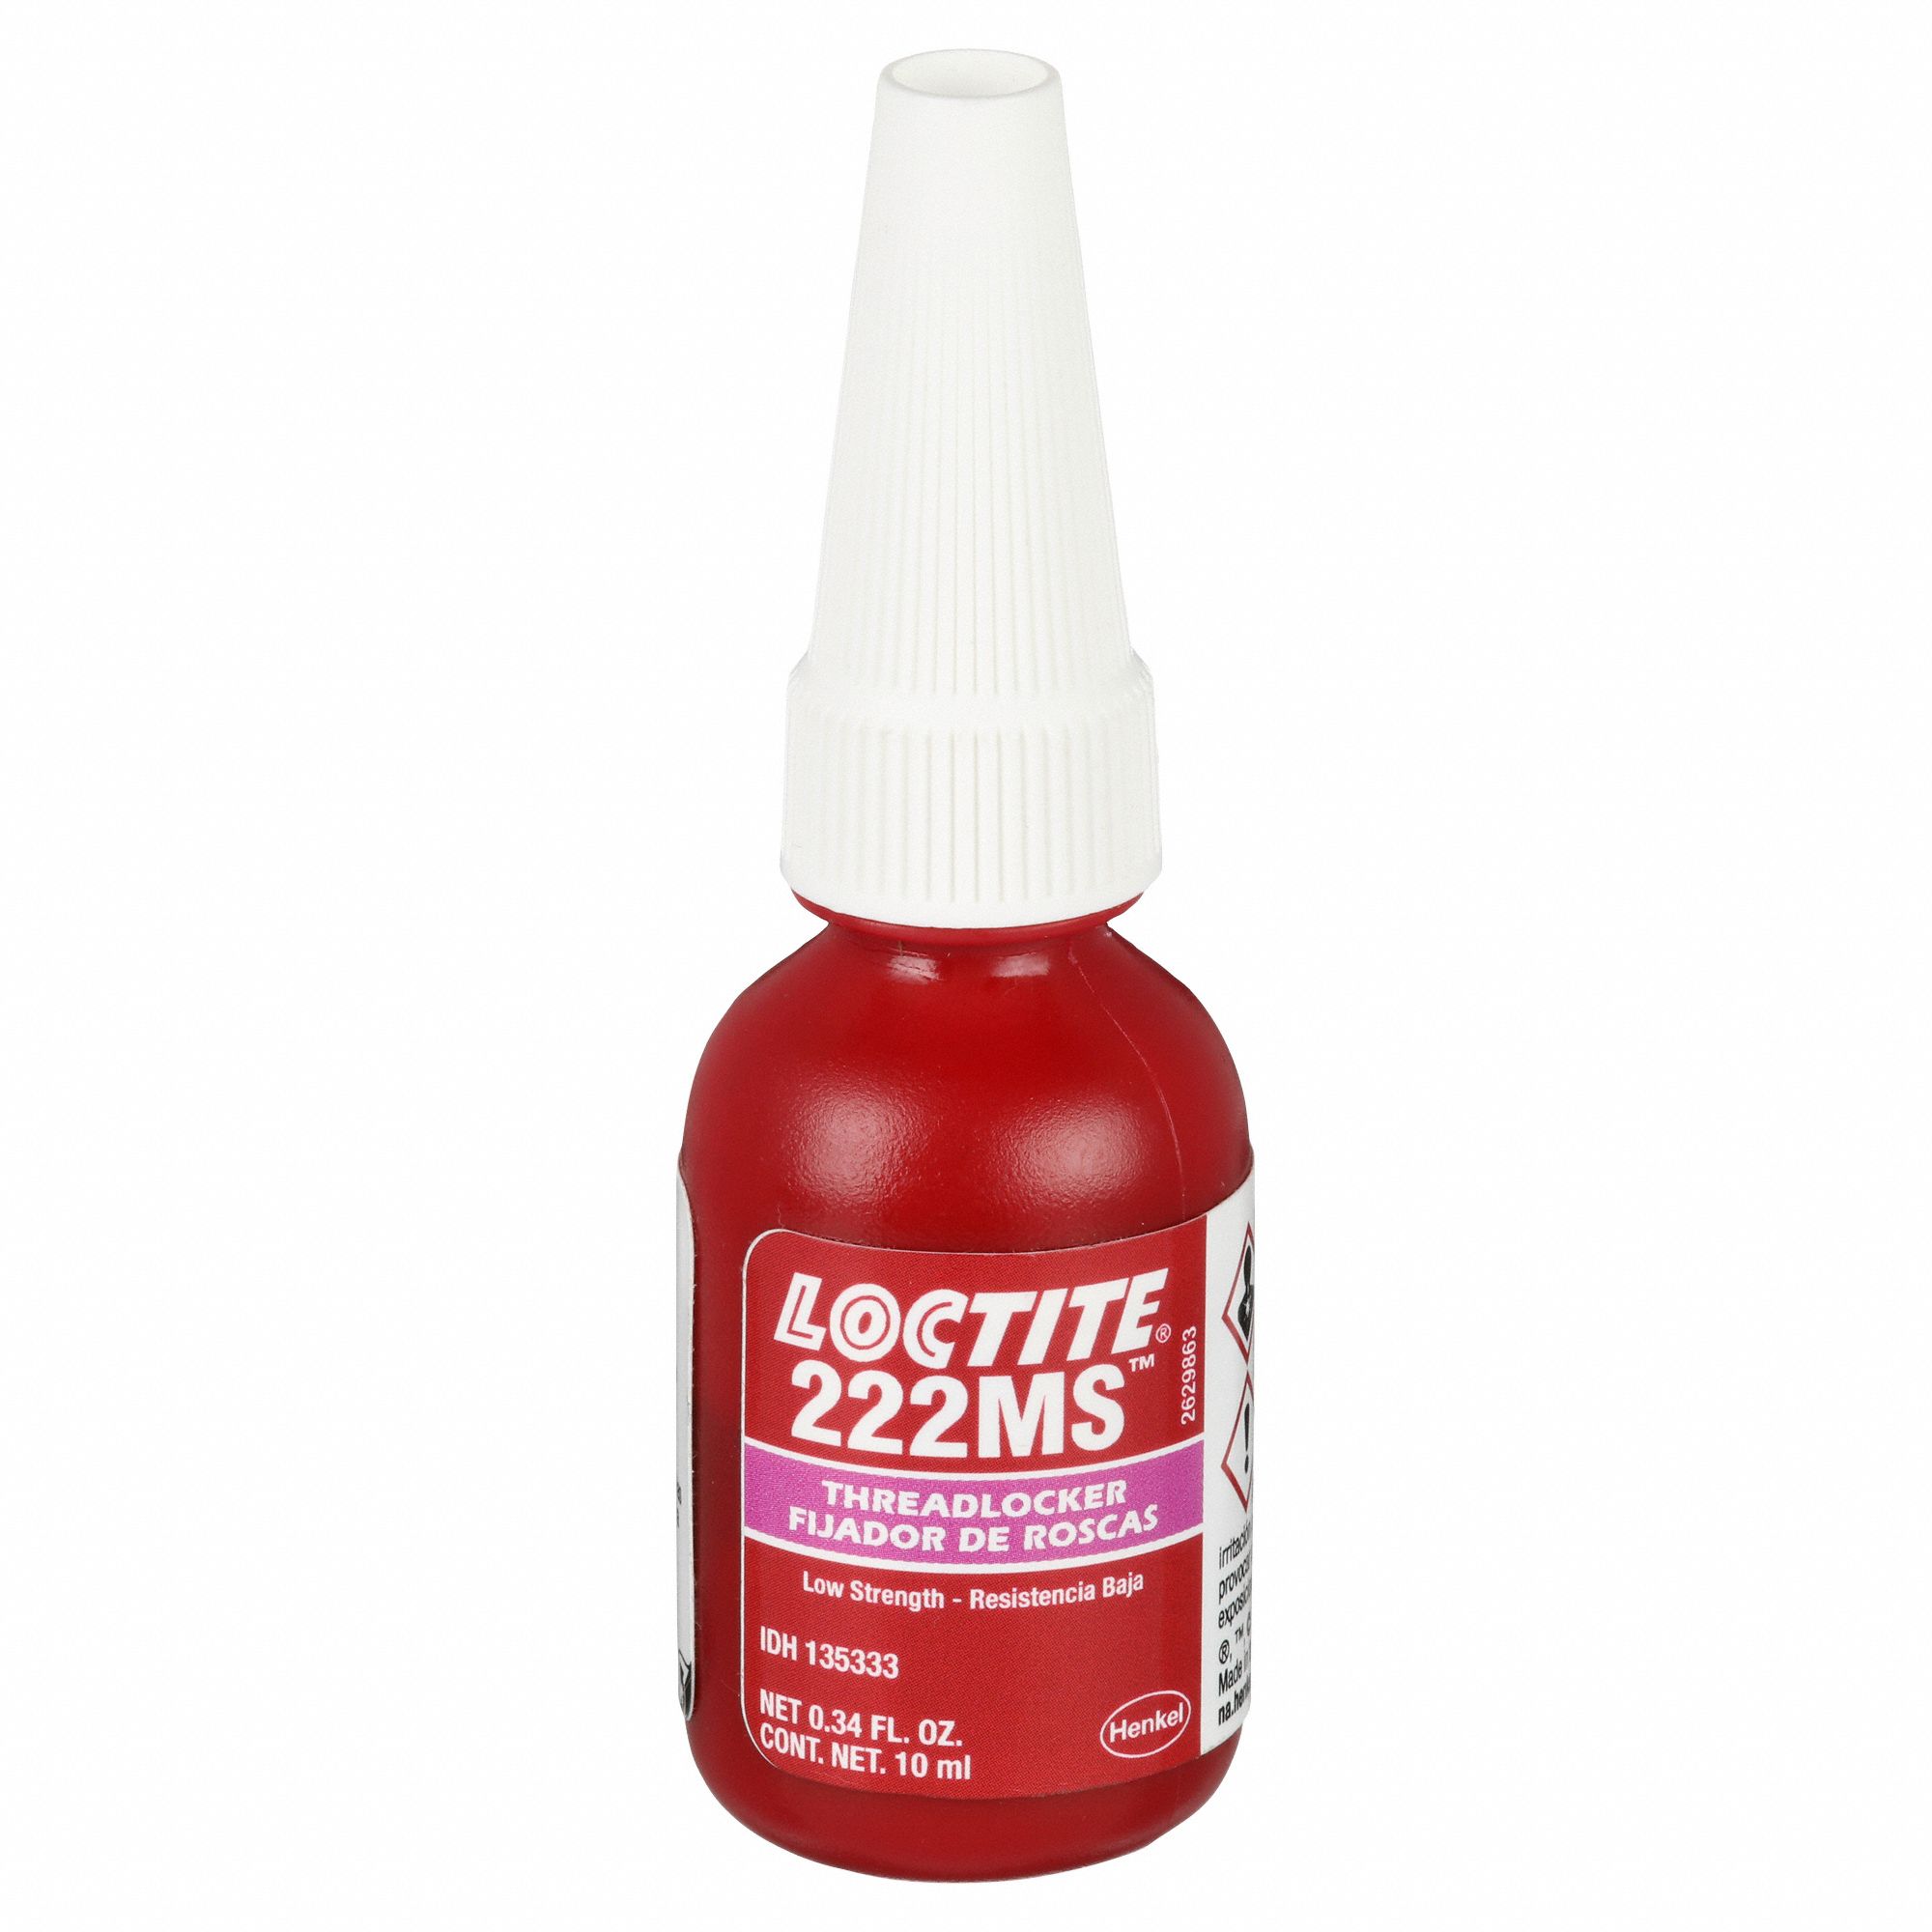  Loctite 222 Threadlocker for Automotive: High-Temperature,  Low-Strength, Anaerobic, One-Piece Assembly, Non-Corrosive, Locks and Seals